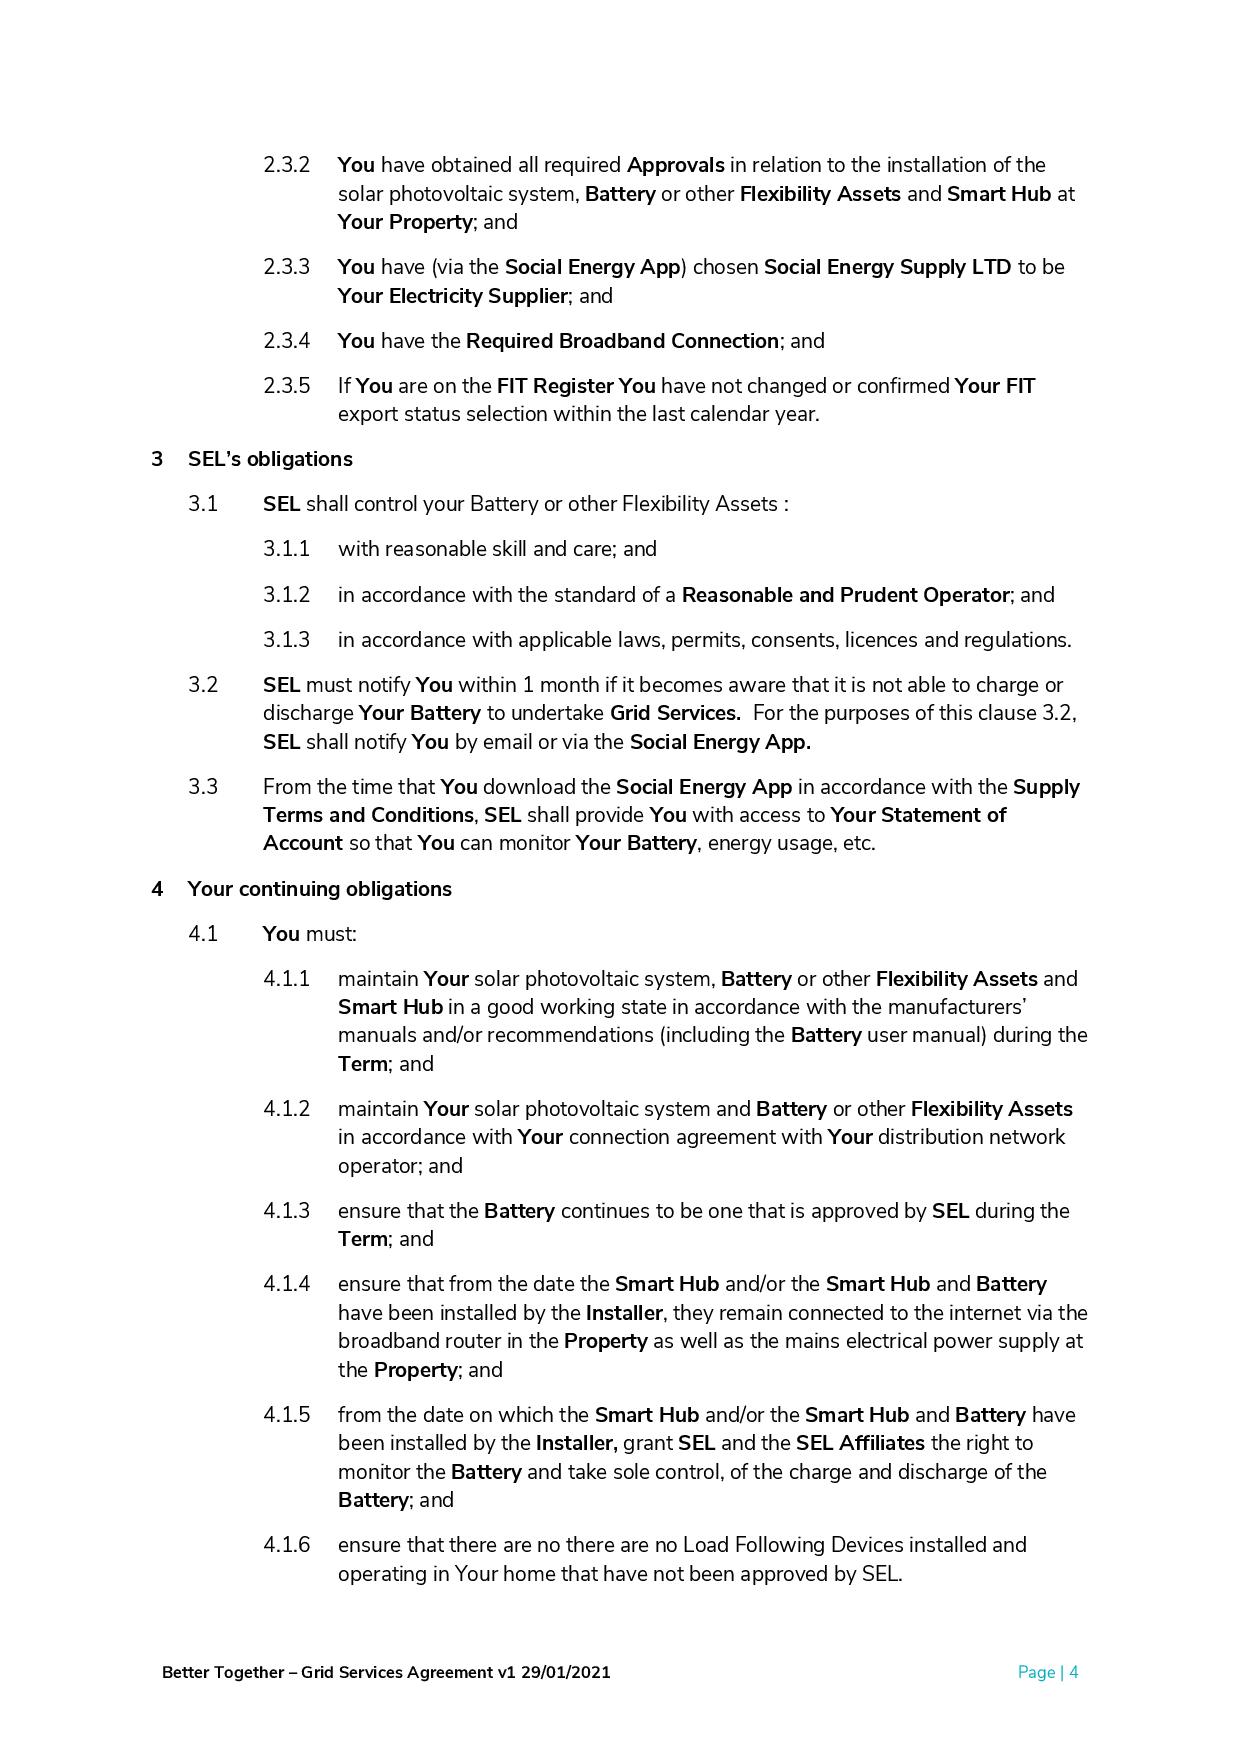 Better_Together_-_Grid_Services_Agreement-page-005.jpg